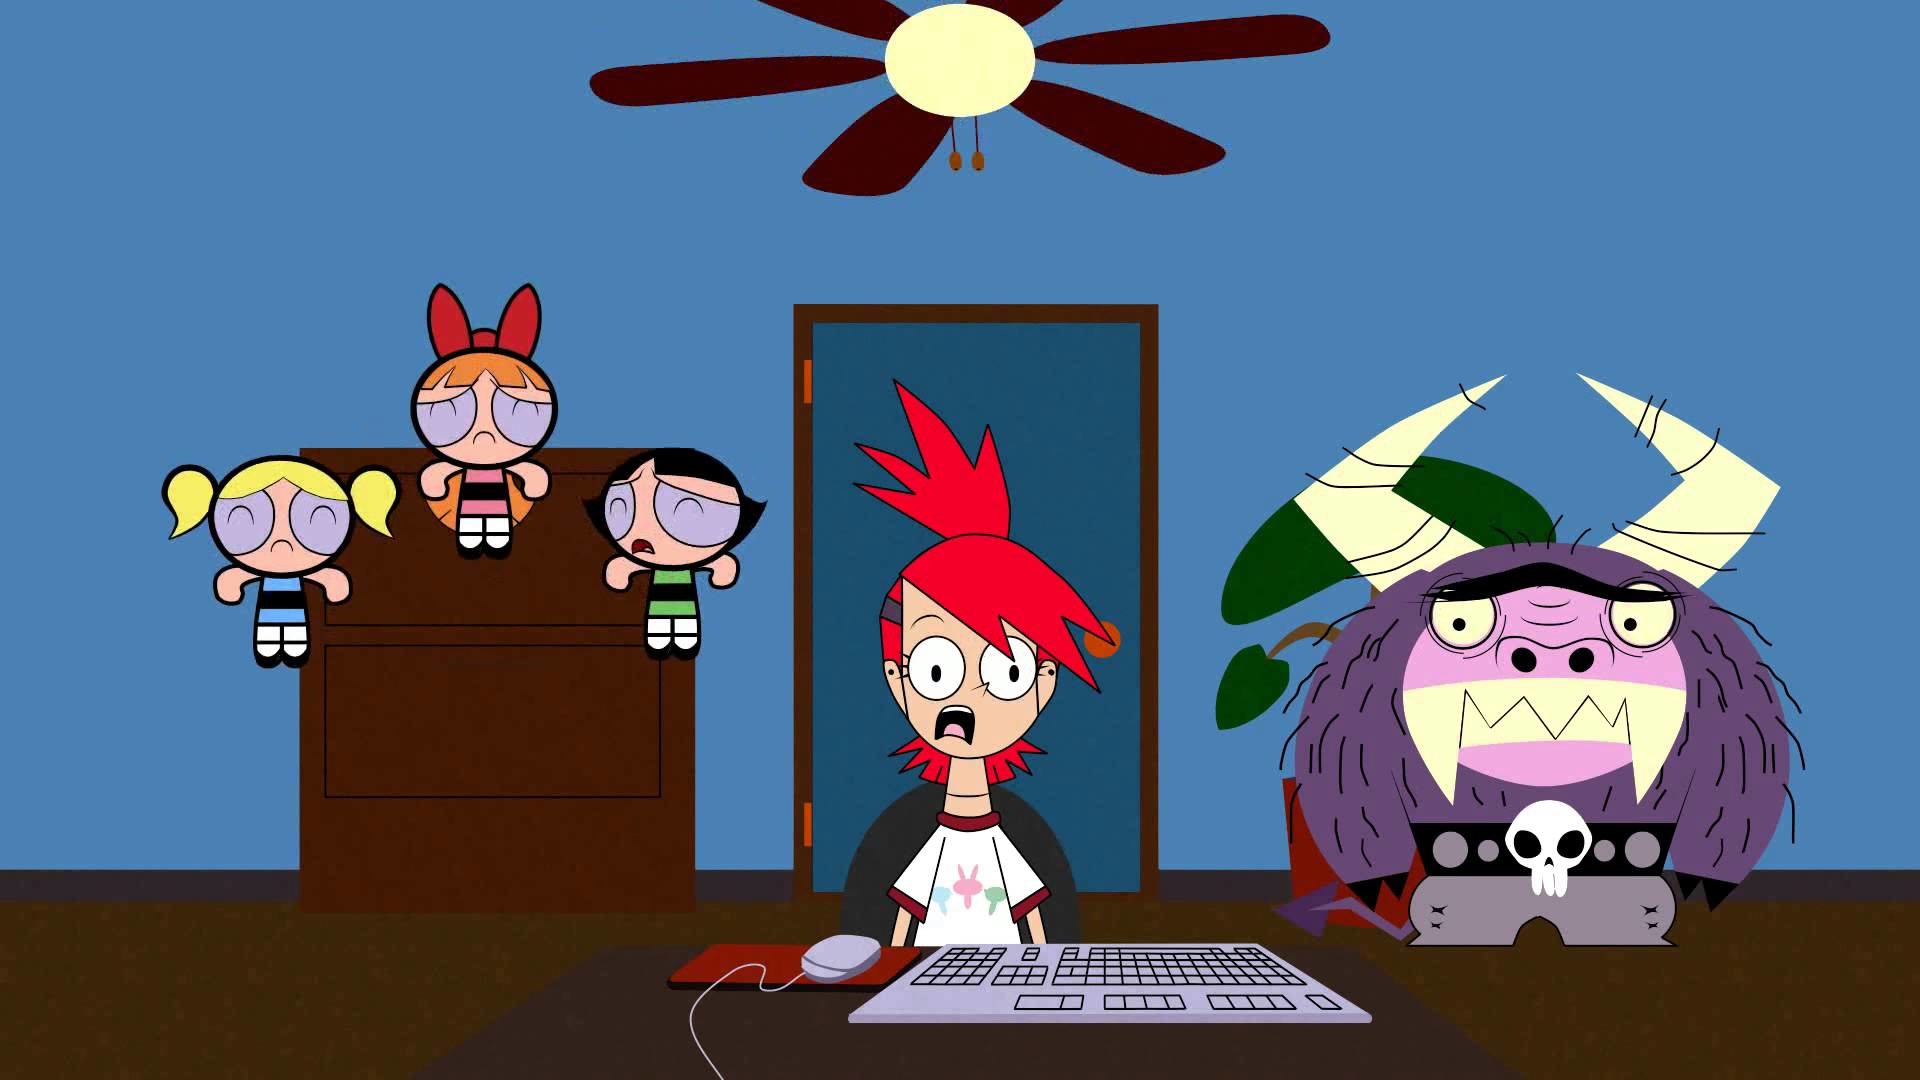 Фрэнк rule 34. Дом друзей Фостера Rule 34. Fosters Home for Imaginary friends Фрэнки. Фрэнки Фостер 34.